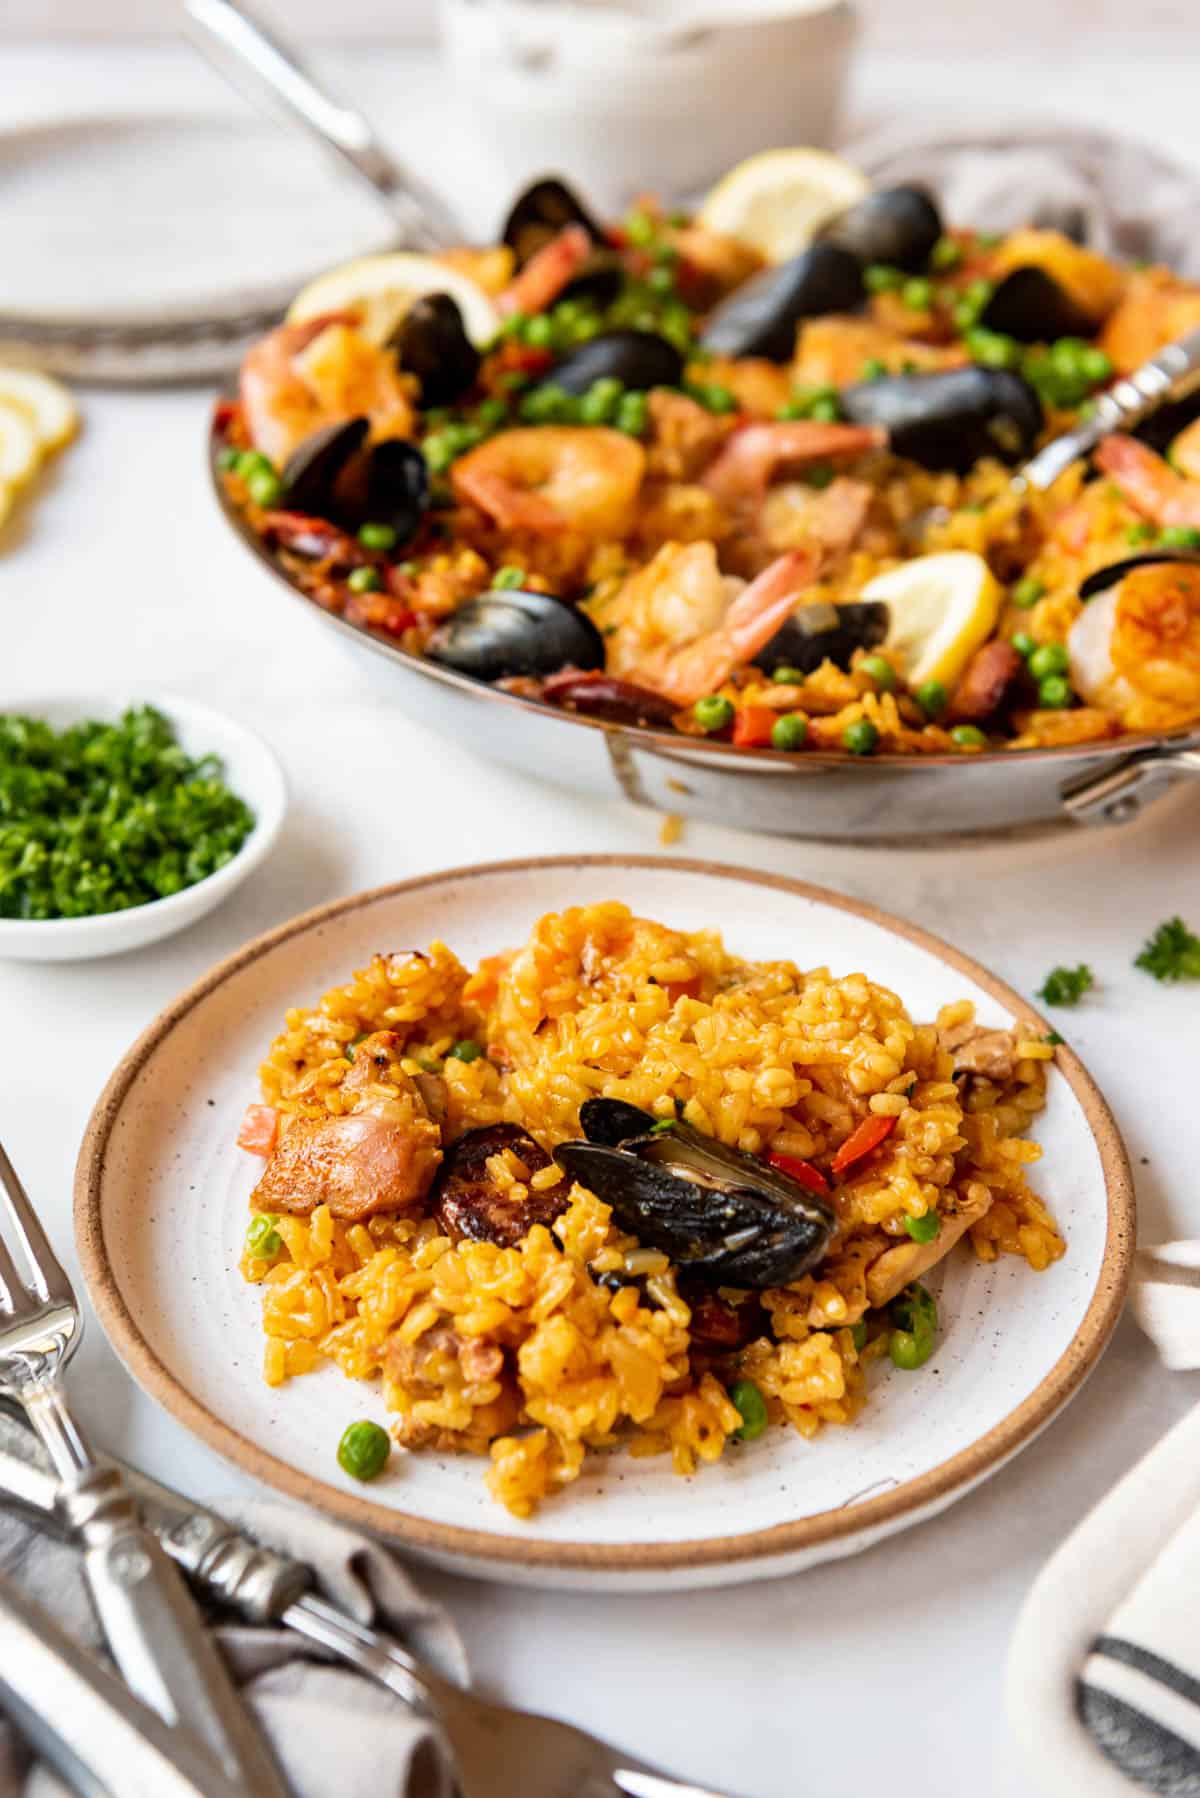 A serving of paella on a plate in front of the paella pan.